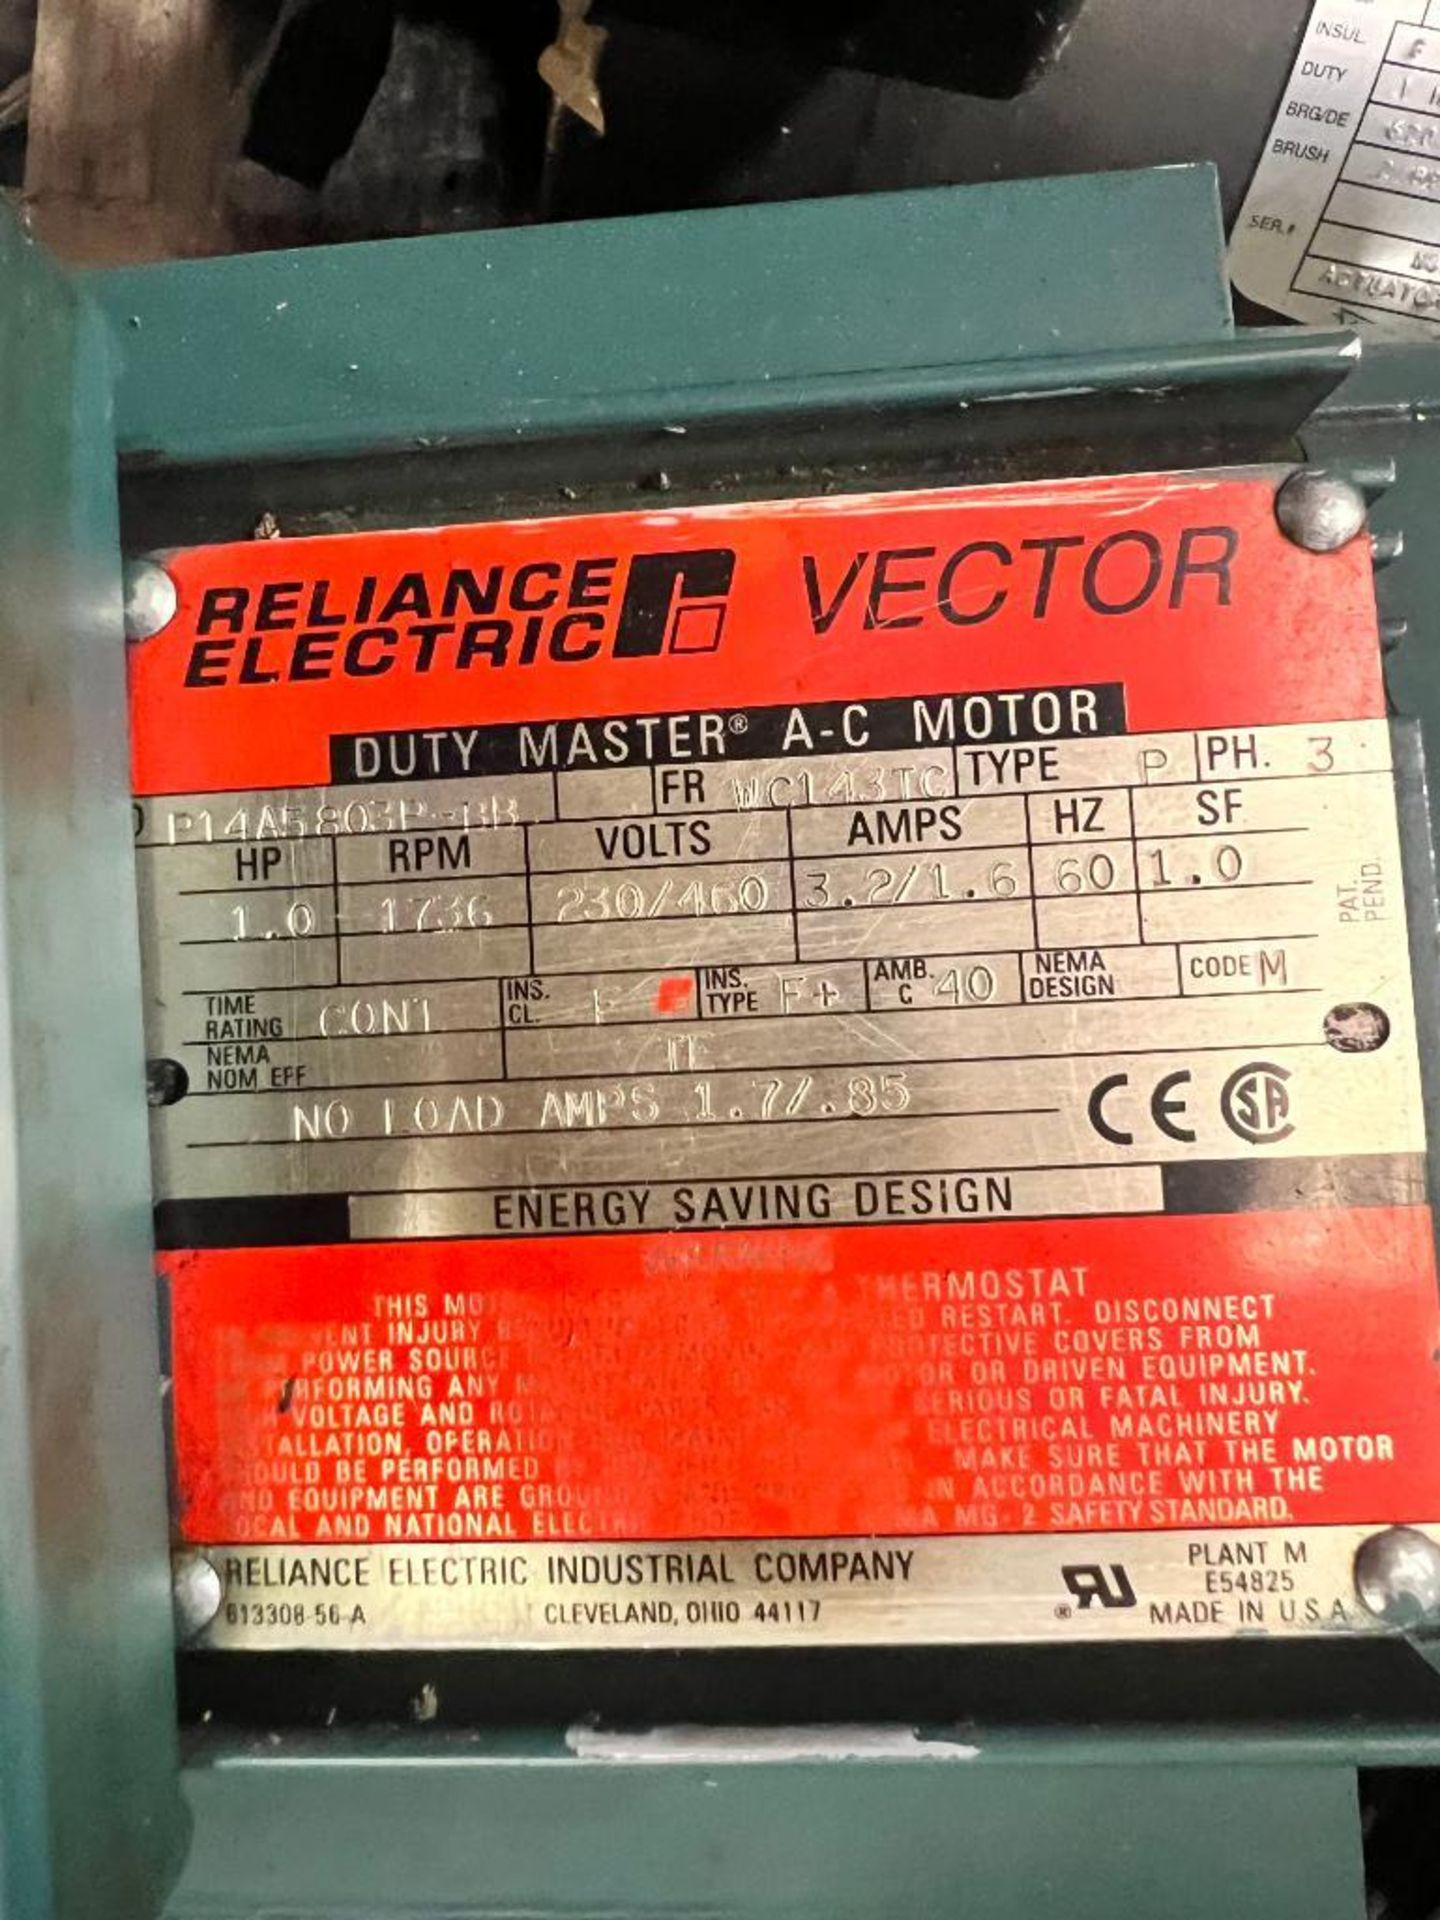 (5x) Reliance Electric Duty Master AC Motors, Model P14A5803P-BB, Frame: WC143TC, Type: P, 3-Phase, - Image 4 of 7